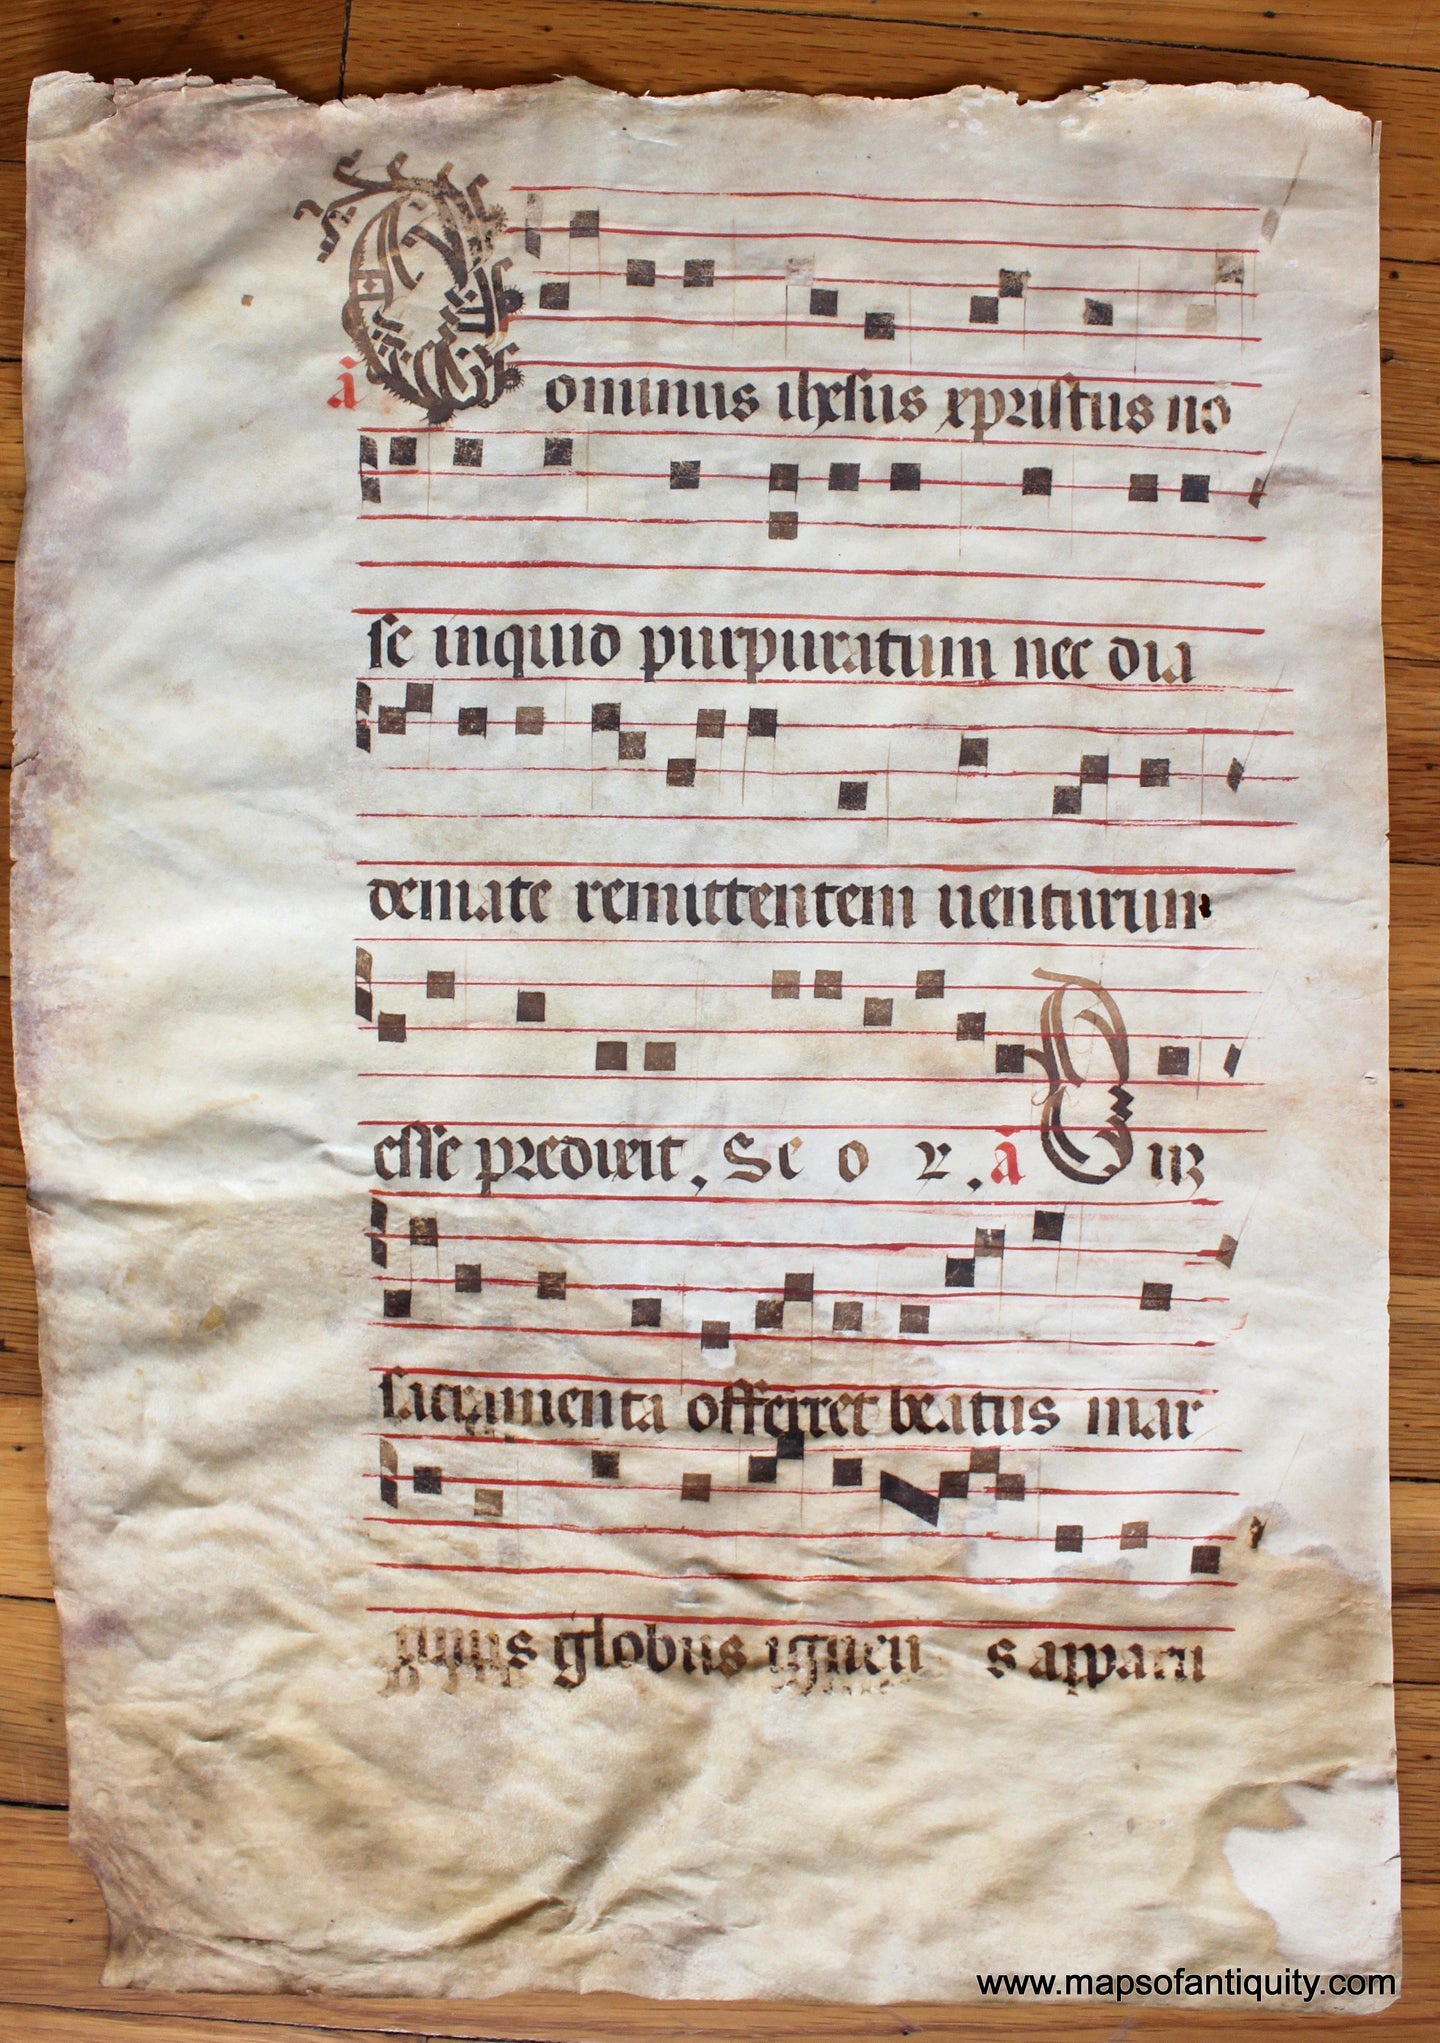 Antique-Sheet-Music-Hand-Painted-Vellum-16th-Century-1500s-Maps-of-Antiquity